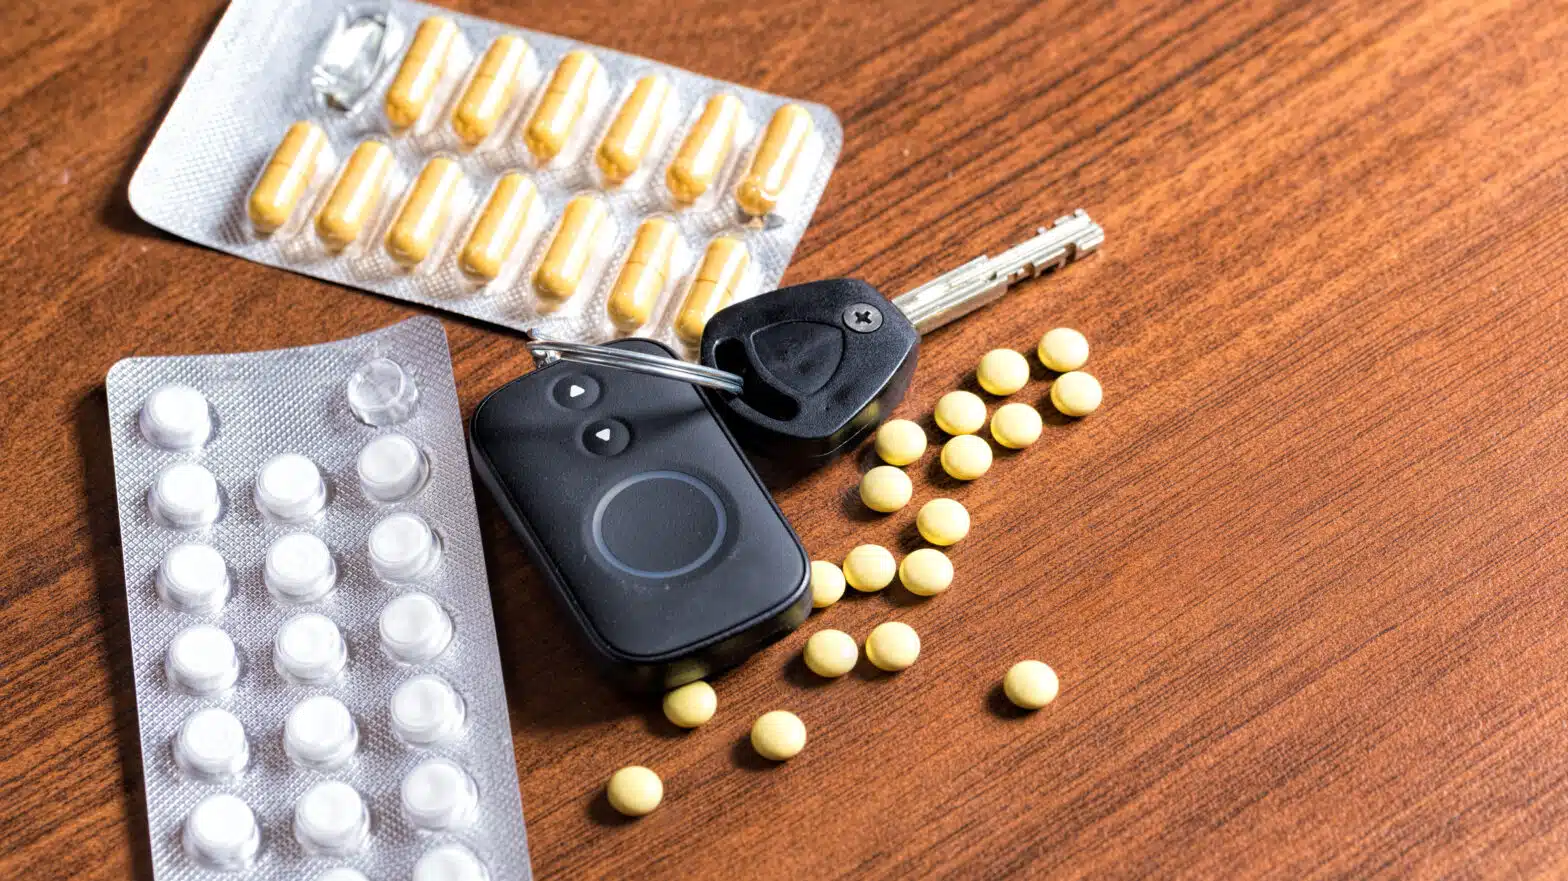 Pills surround a set of car keys - The Effects Of Xanax On Driving